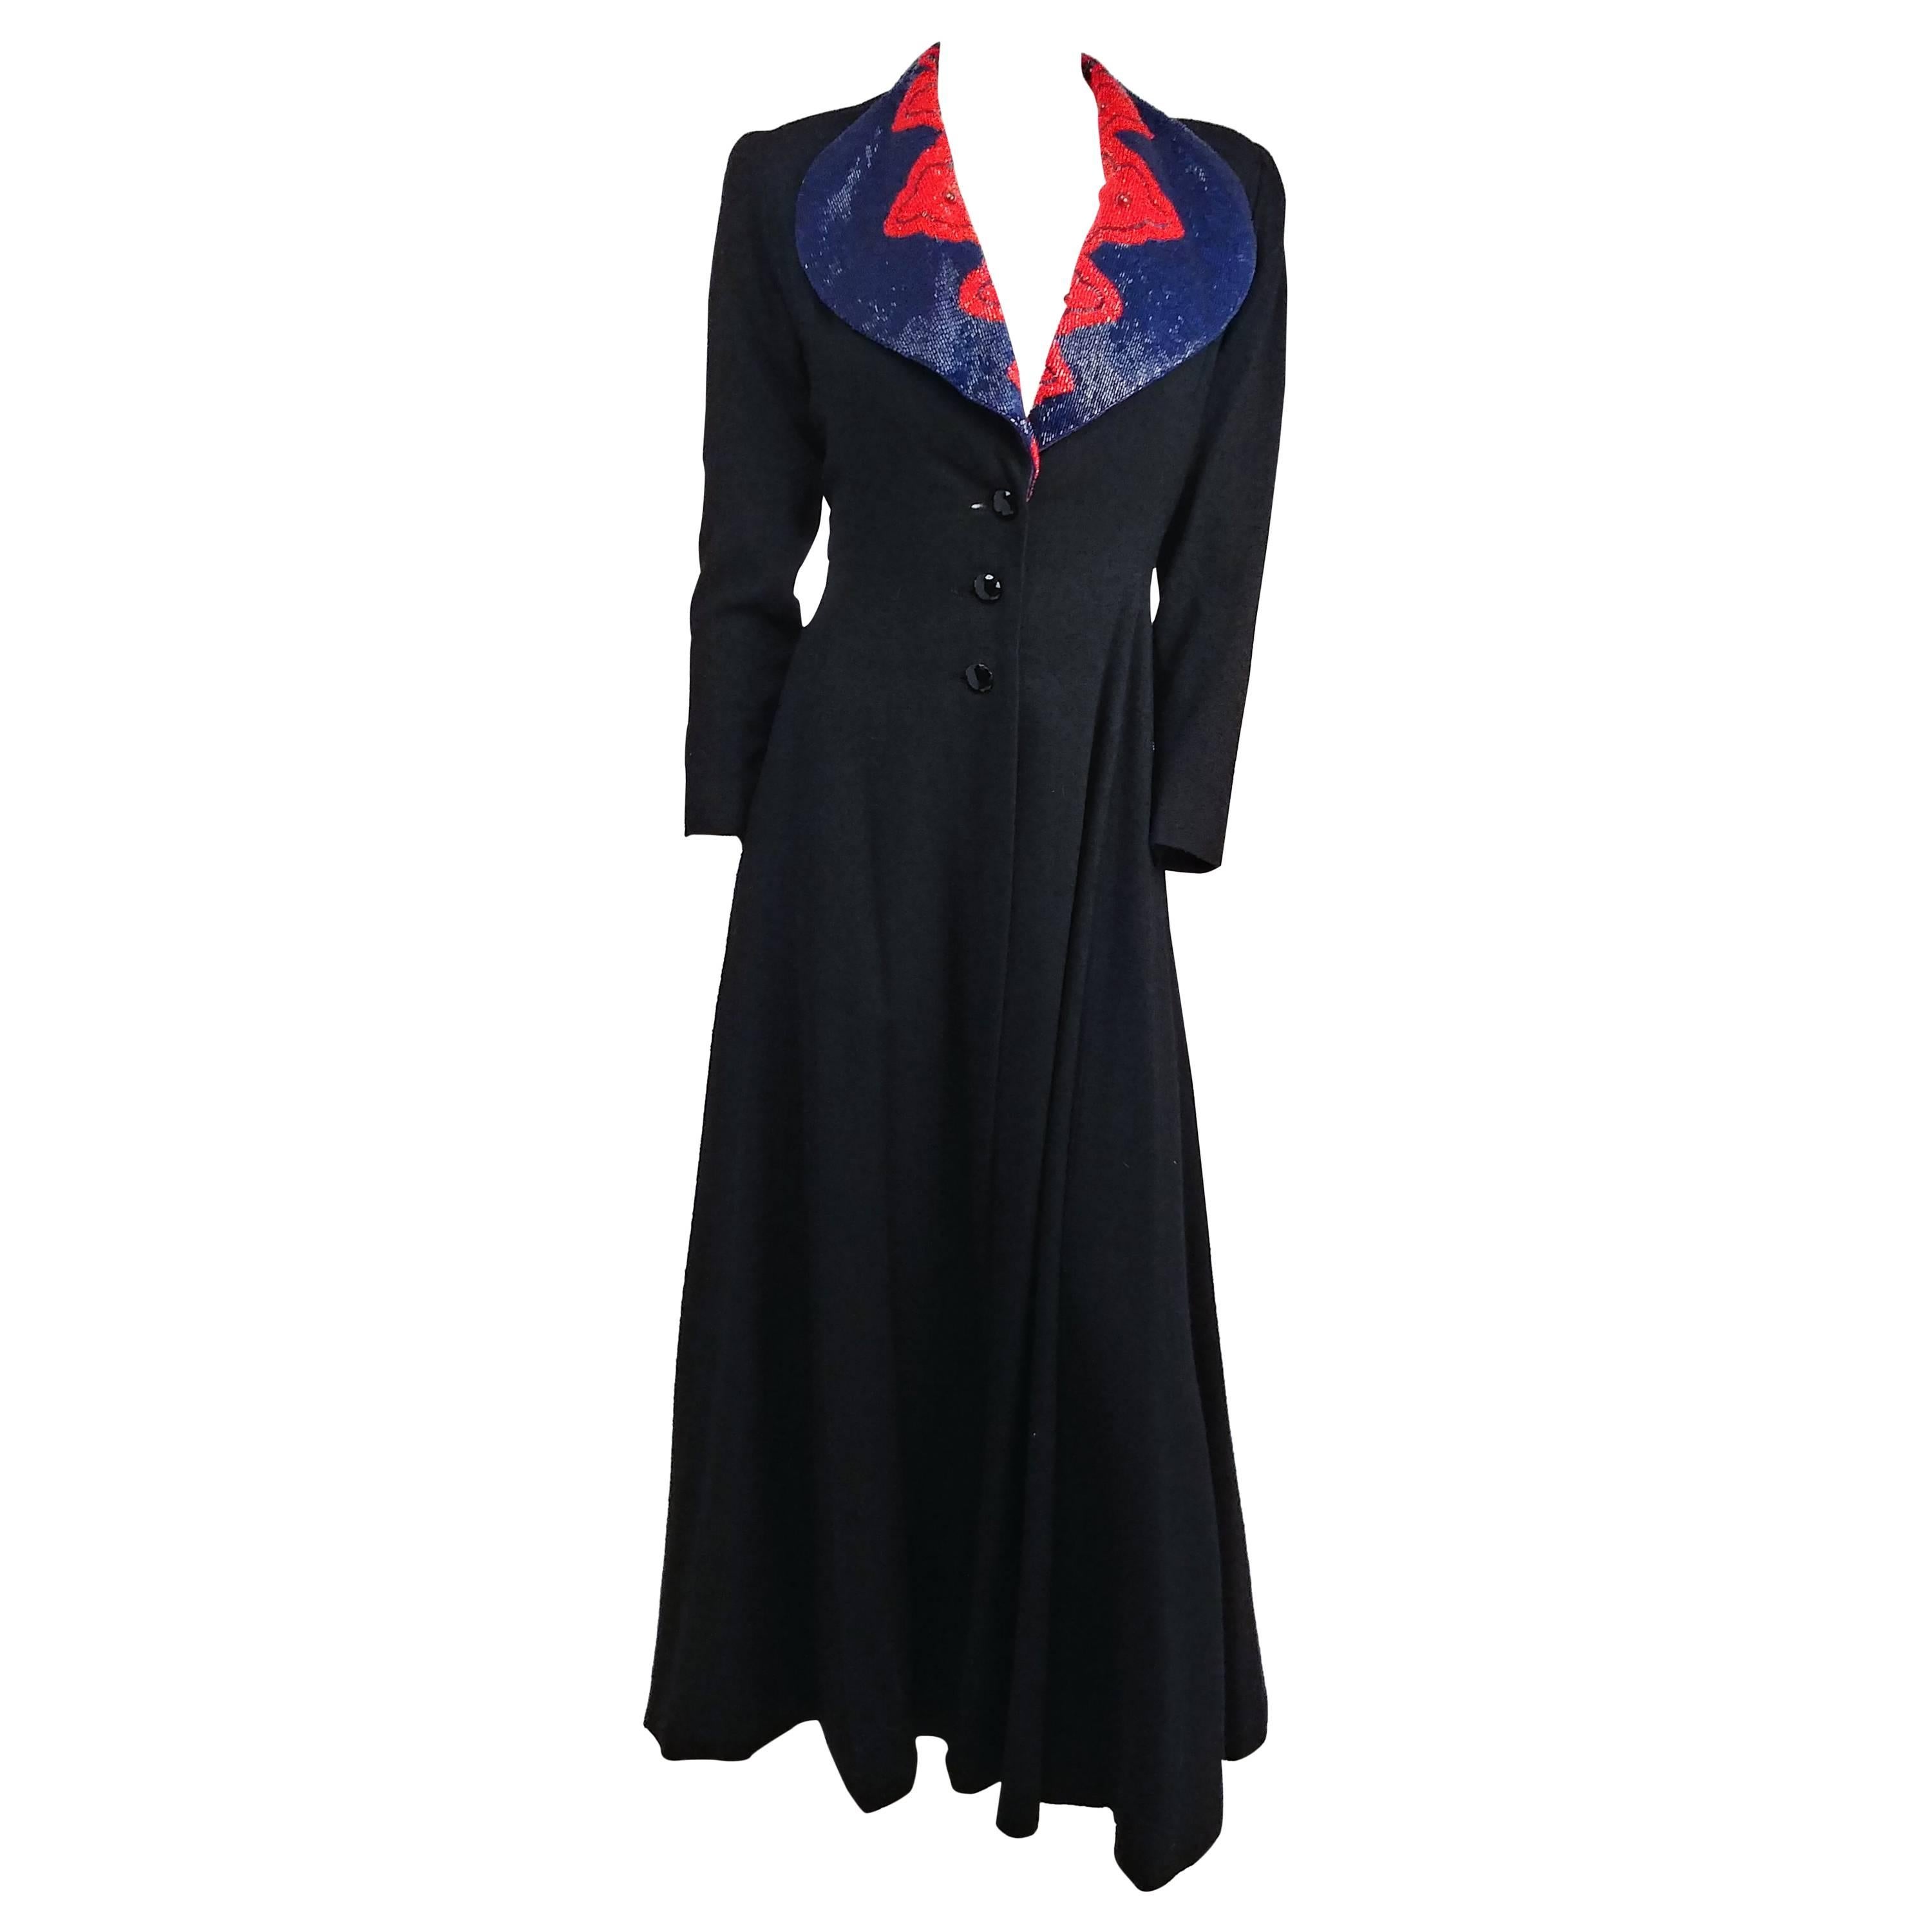 1940s Black Wool Coat with Red and Blue Beaded Collar